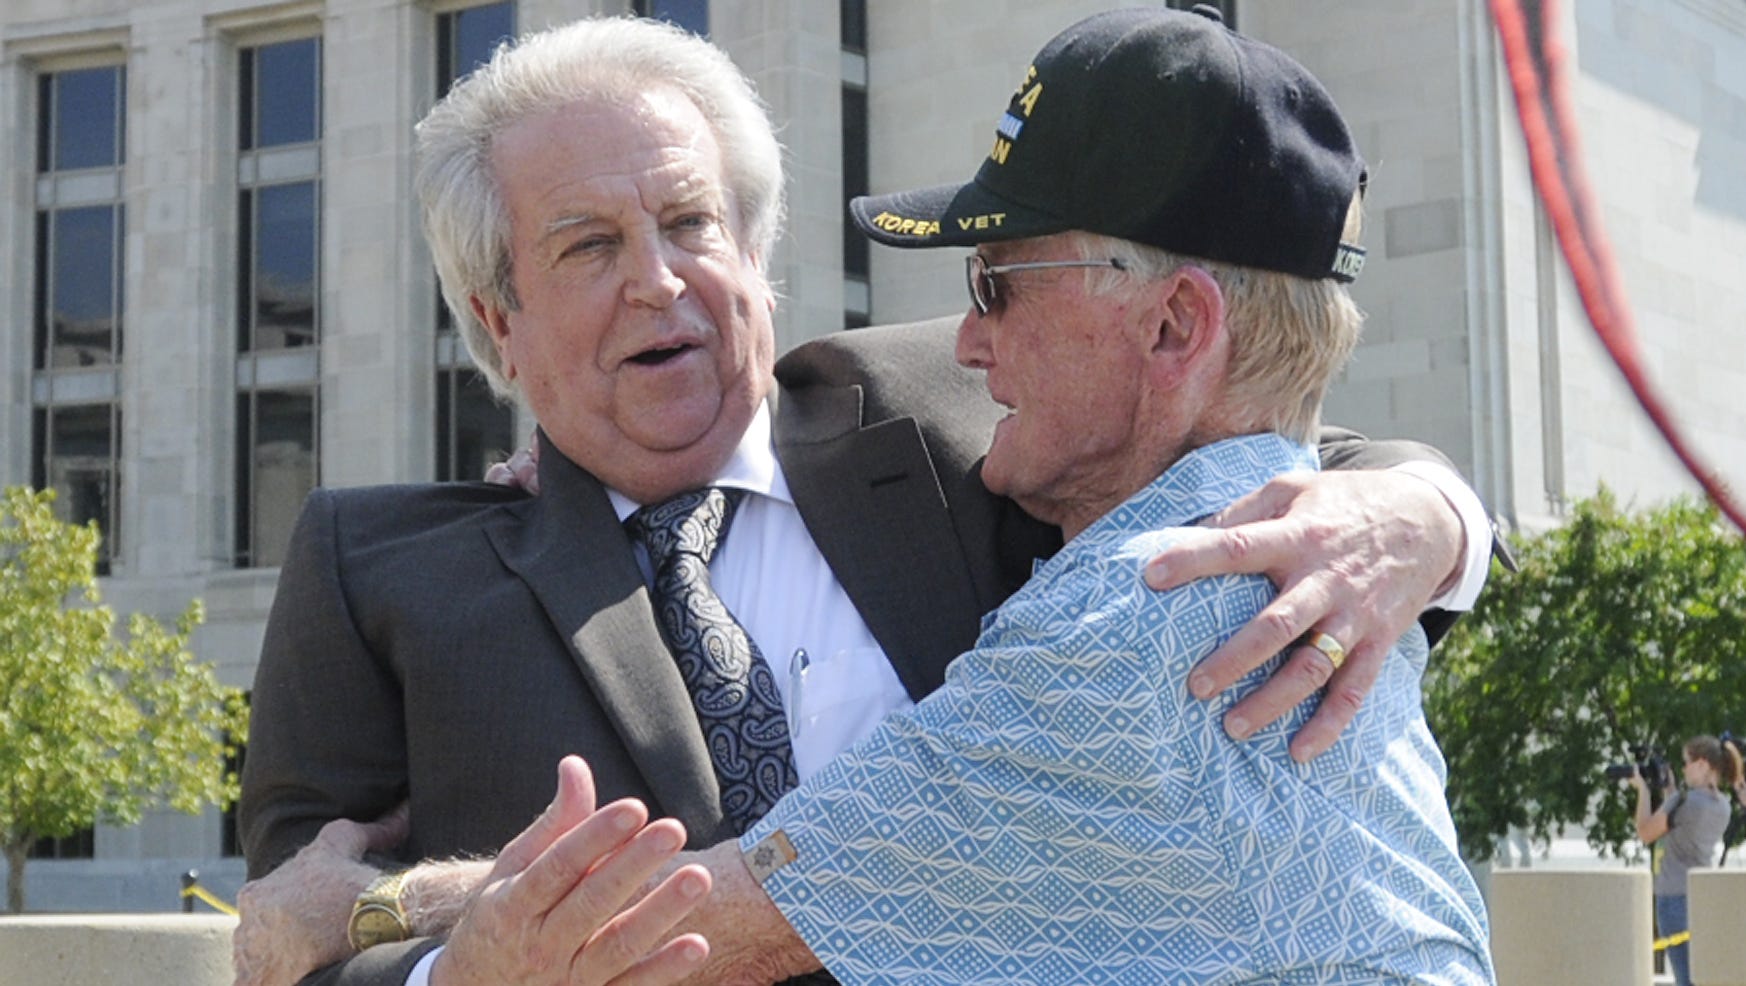 Milton McGregor is hugged by a supporter following the reading of the verdicts in the gambling corruption trial at the Federal Courthouse in Montgomery, Ala. on Thursday August 11, 2011. (Montgomery Advertiser, Mickey Welsh)